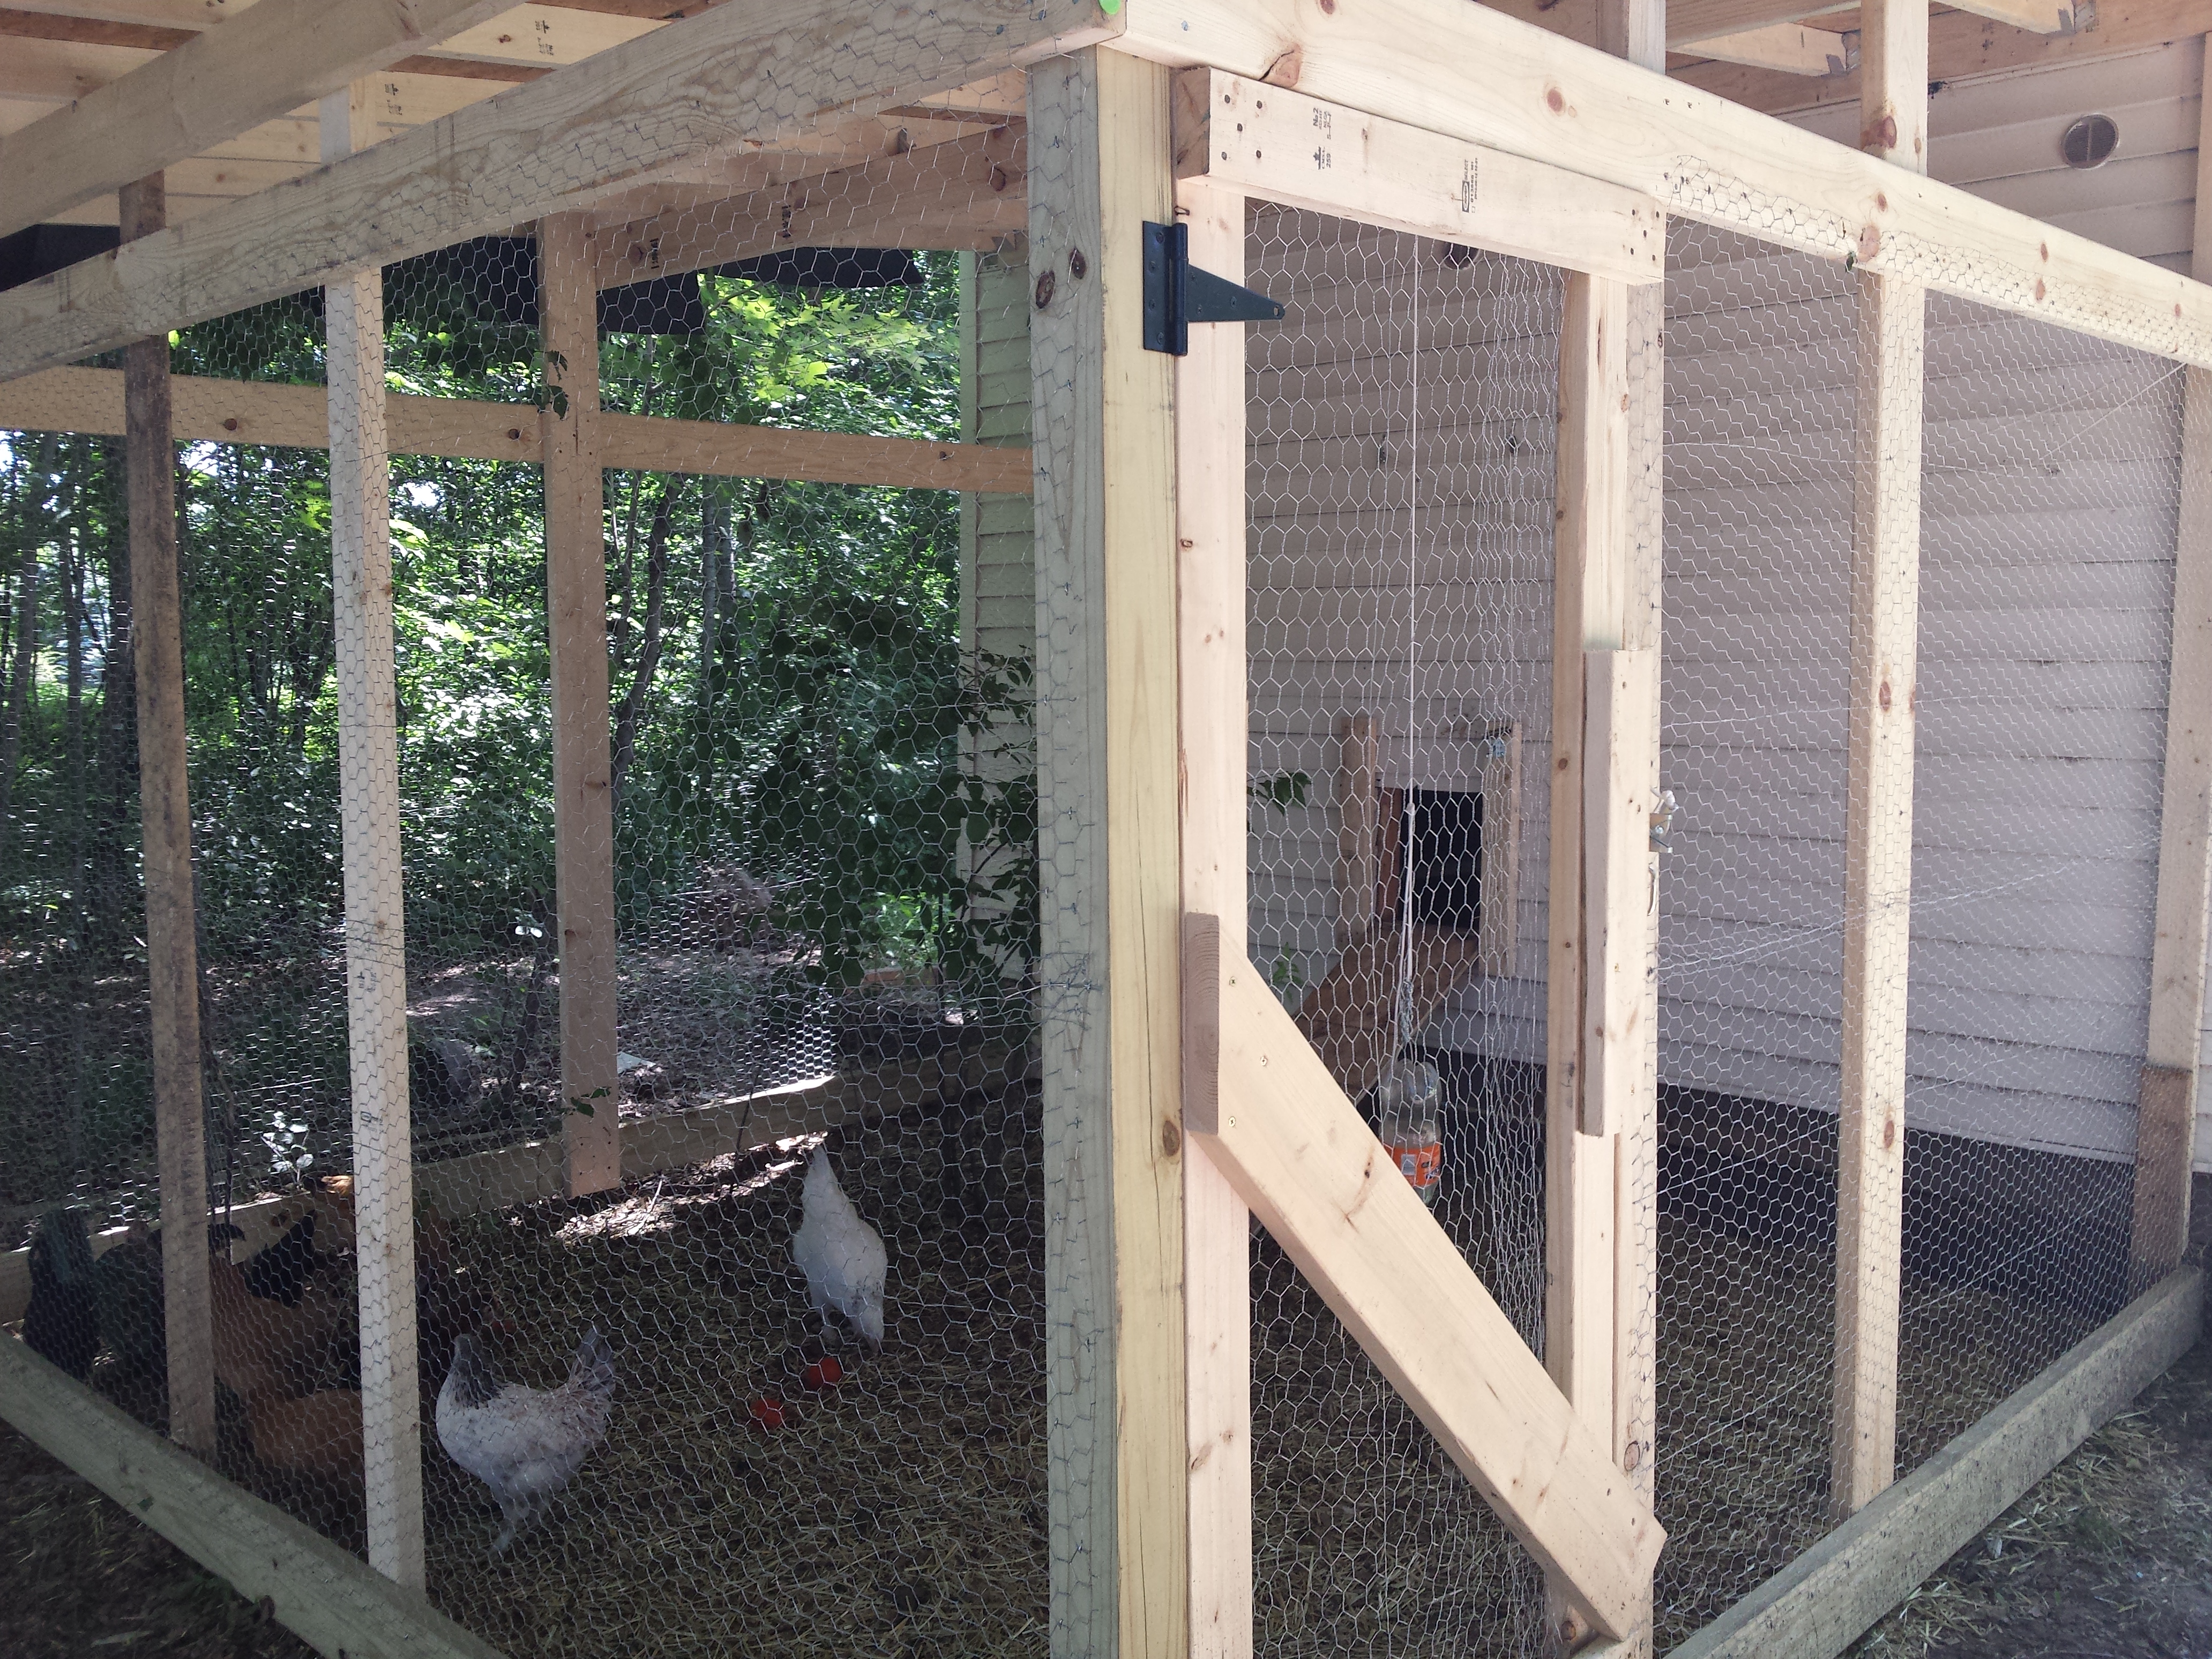 We still have to finish fencing the top and dig some wiring below the coop